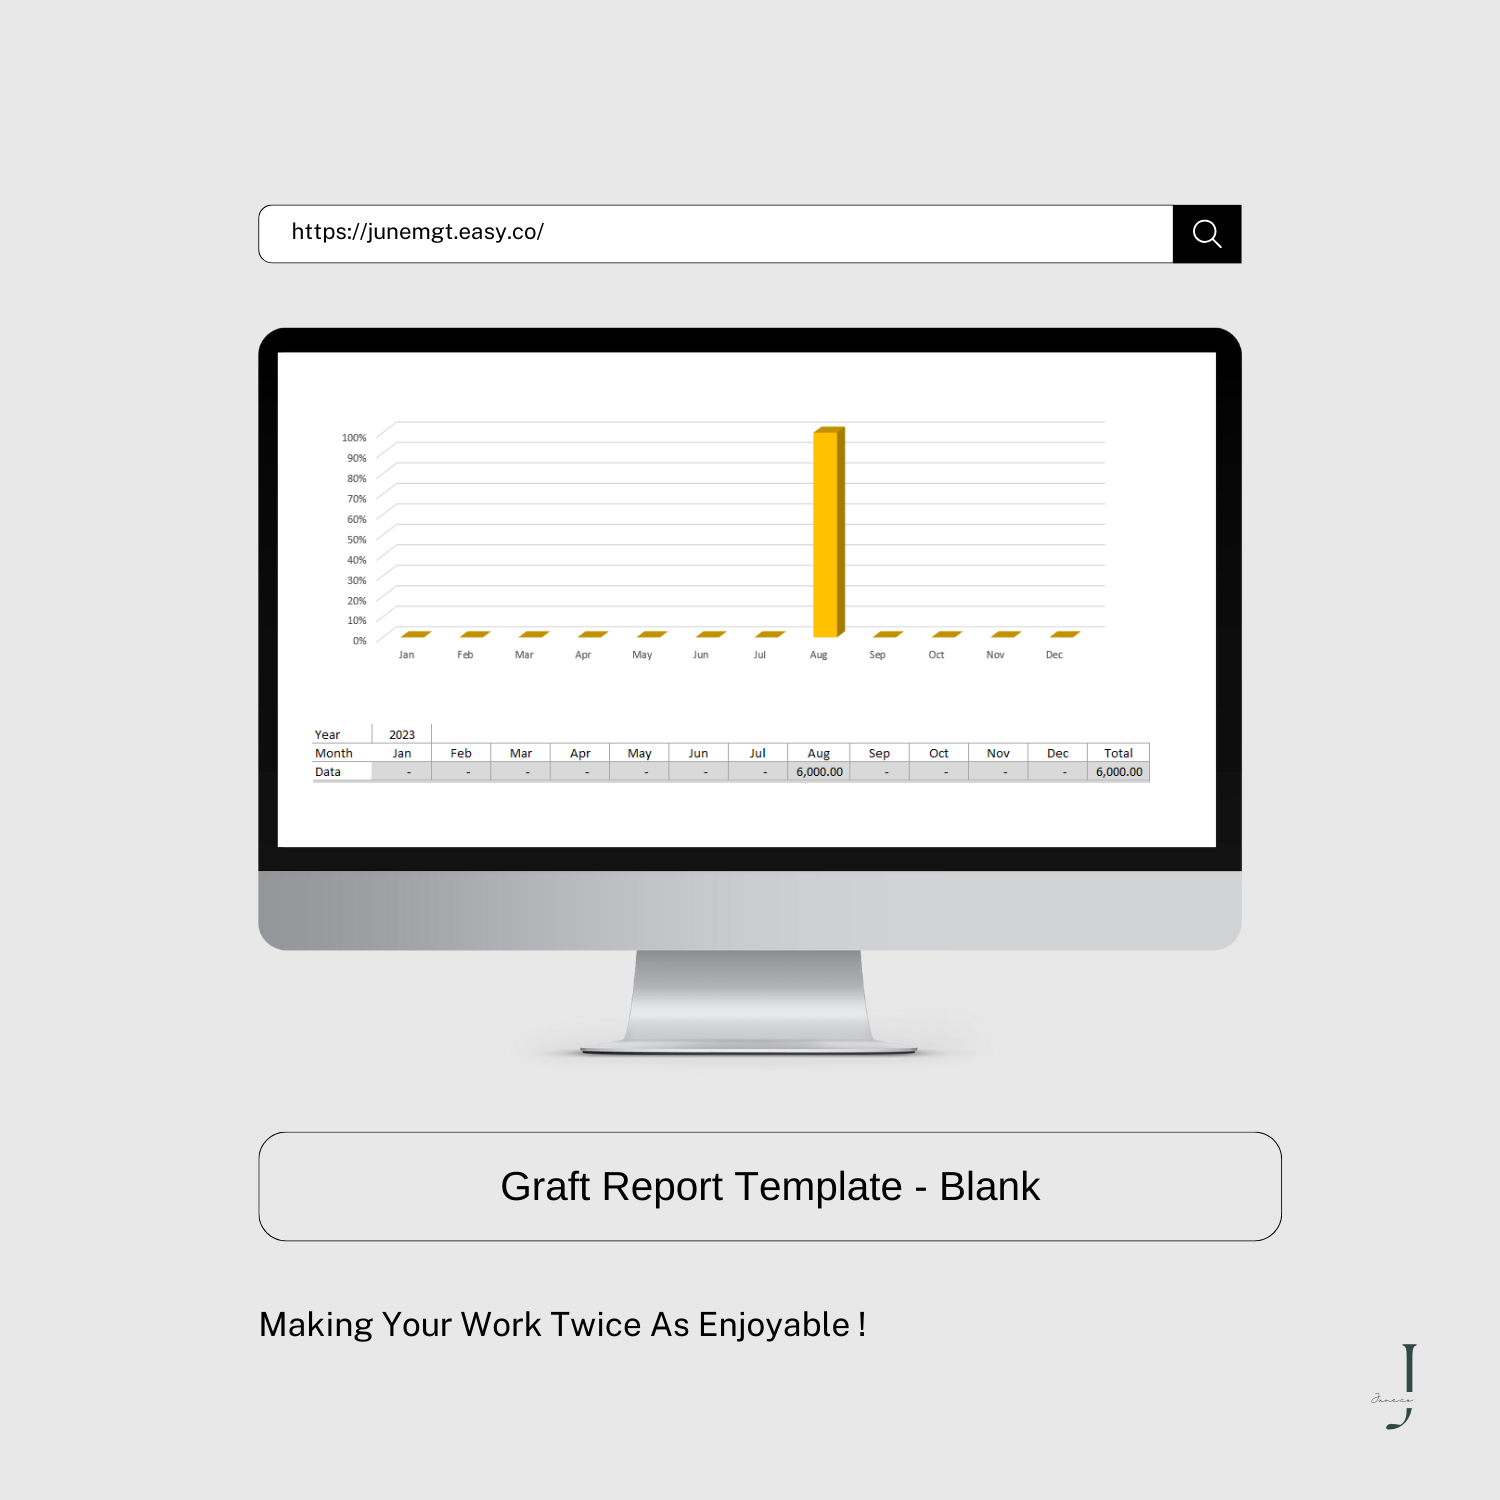 Graft Report Template - Blank product